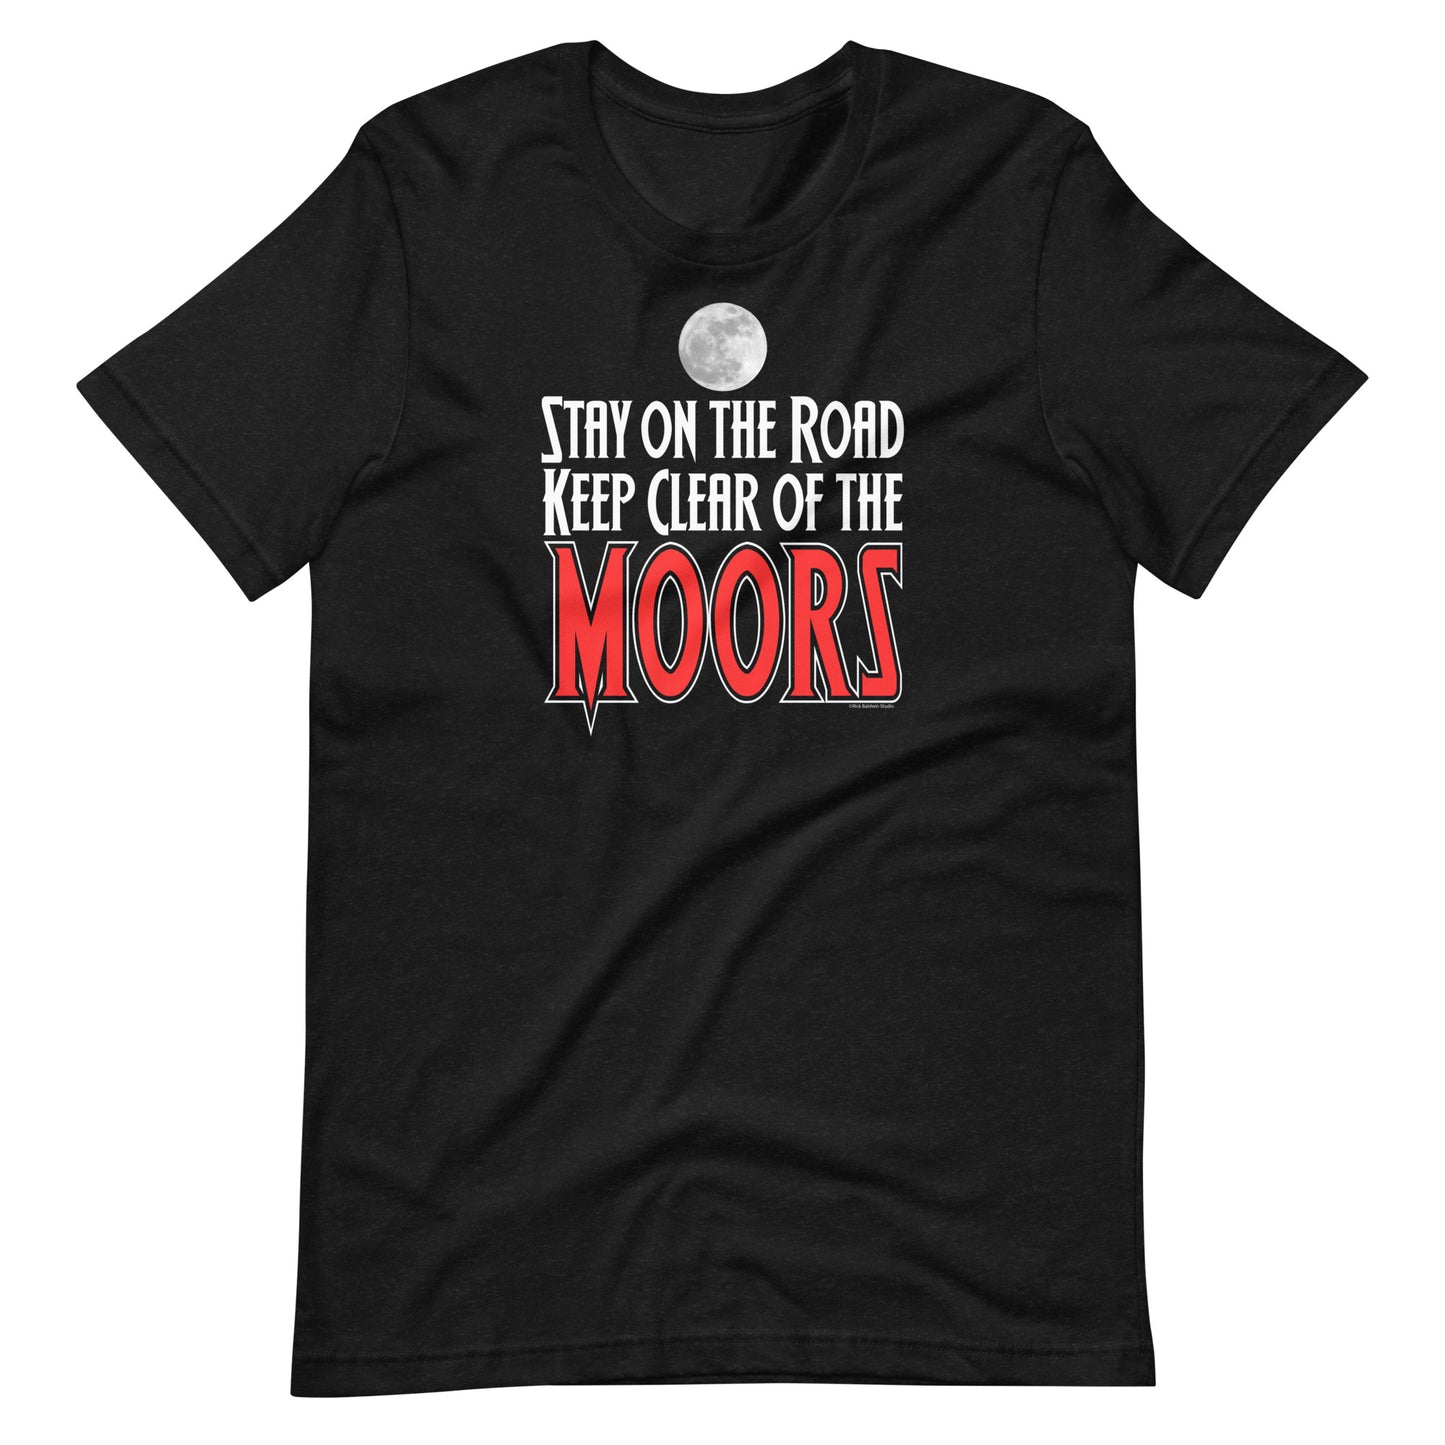 Keep Clear of the Moors Unisex T-shirt by RICK BALDWIN